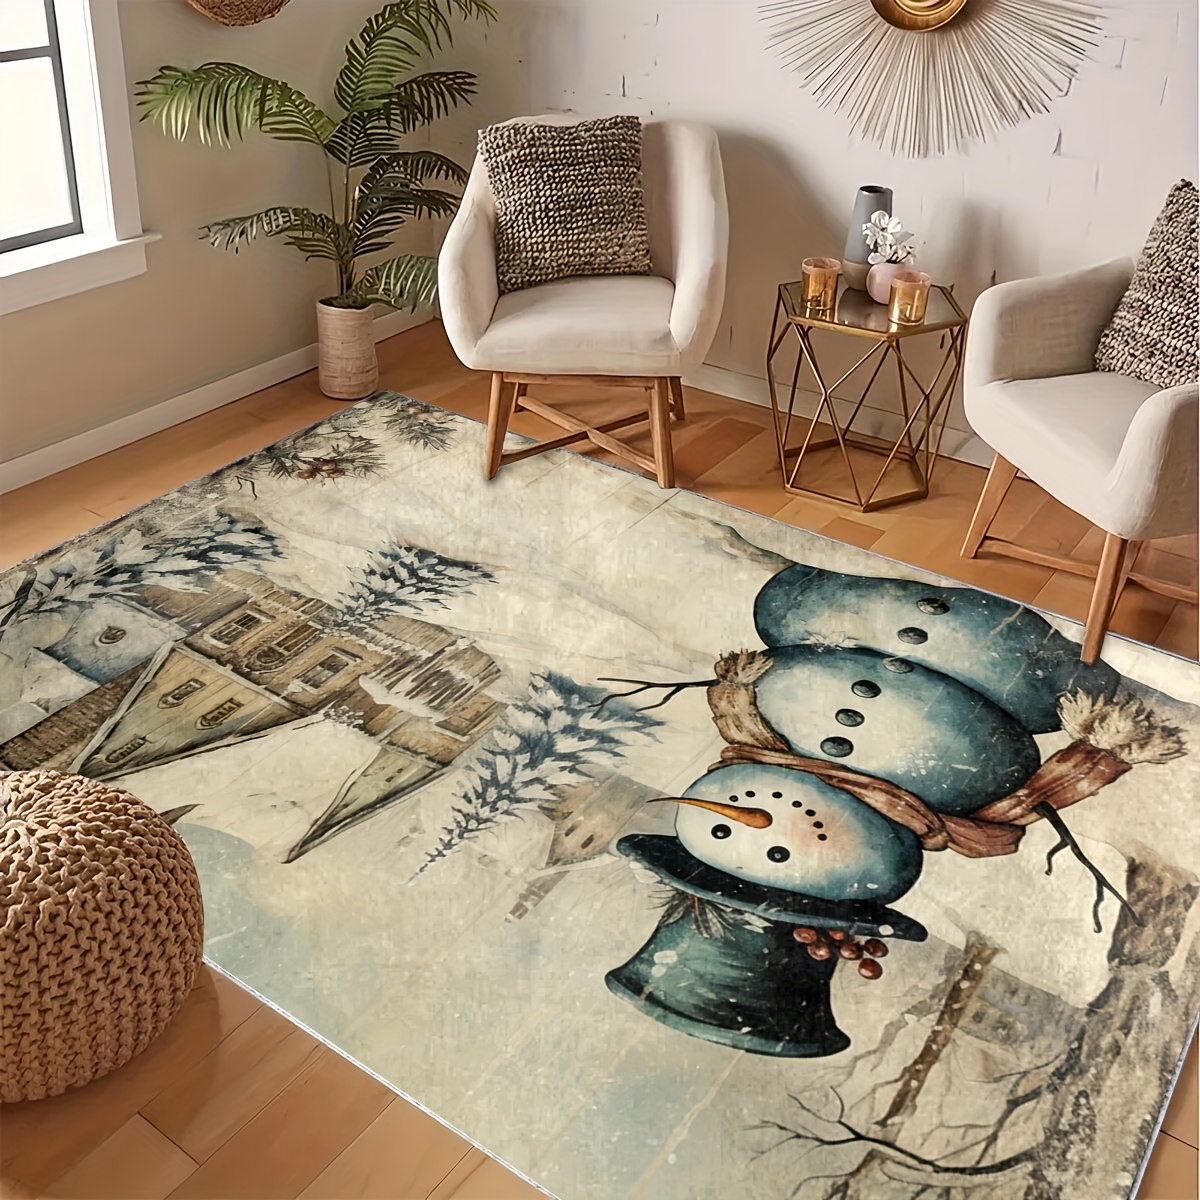 Dog Area Rugs 3x5 ft - Christmas Rug for Living Room Bedroom Decor, Printed  Floor Small Rug for Dining Room Home Decorative, Soft & Non-Slip 